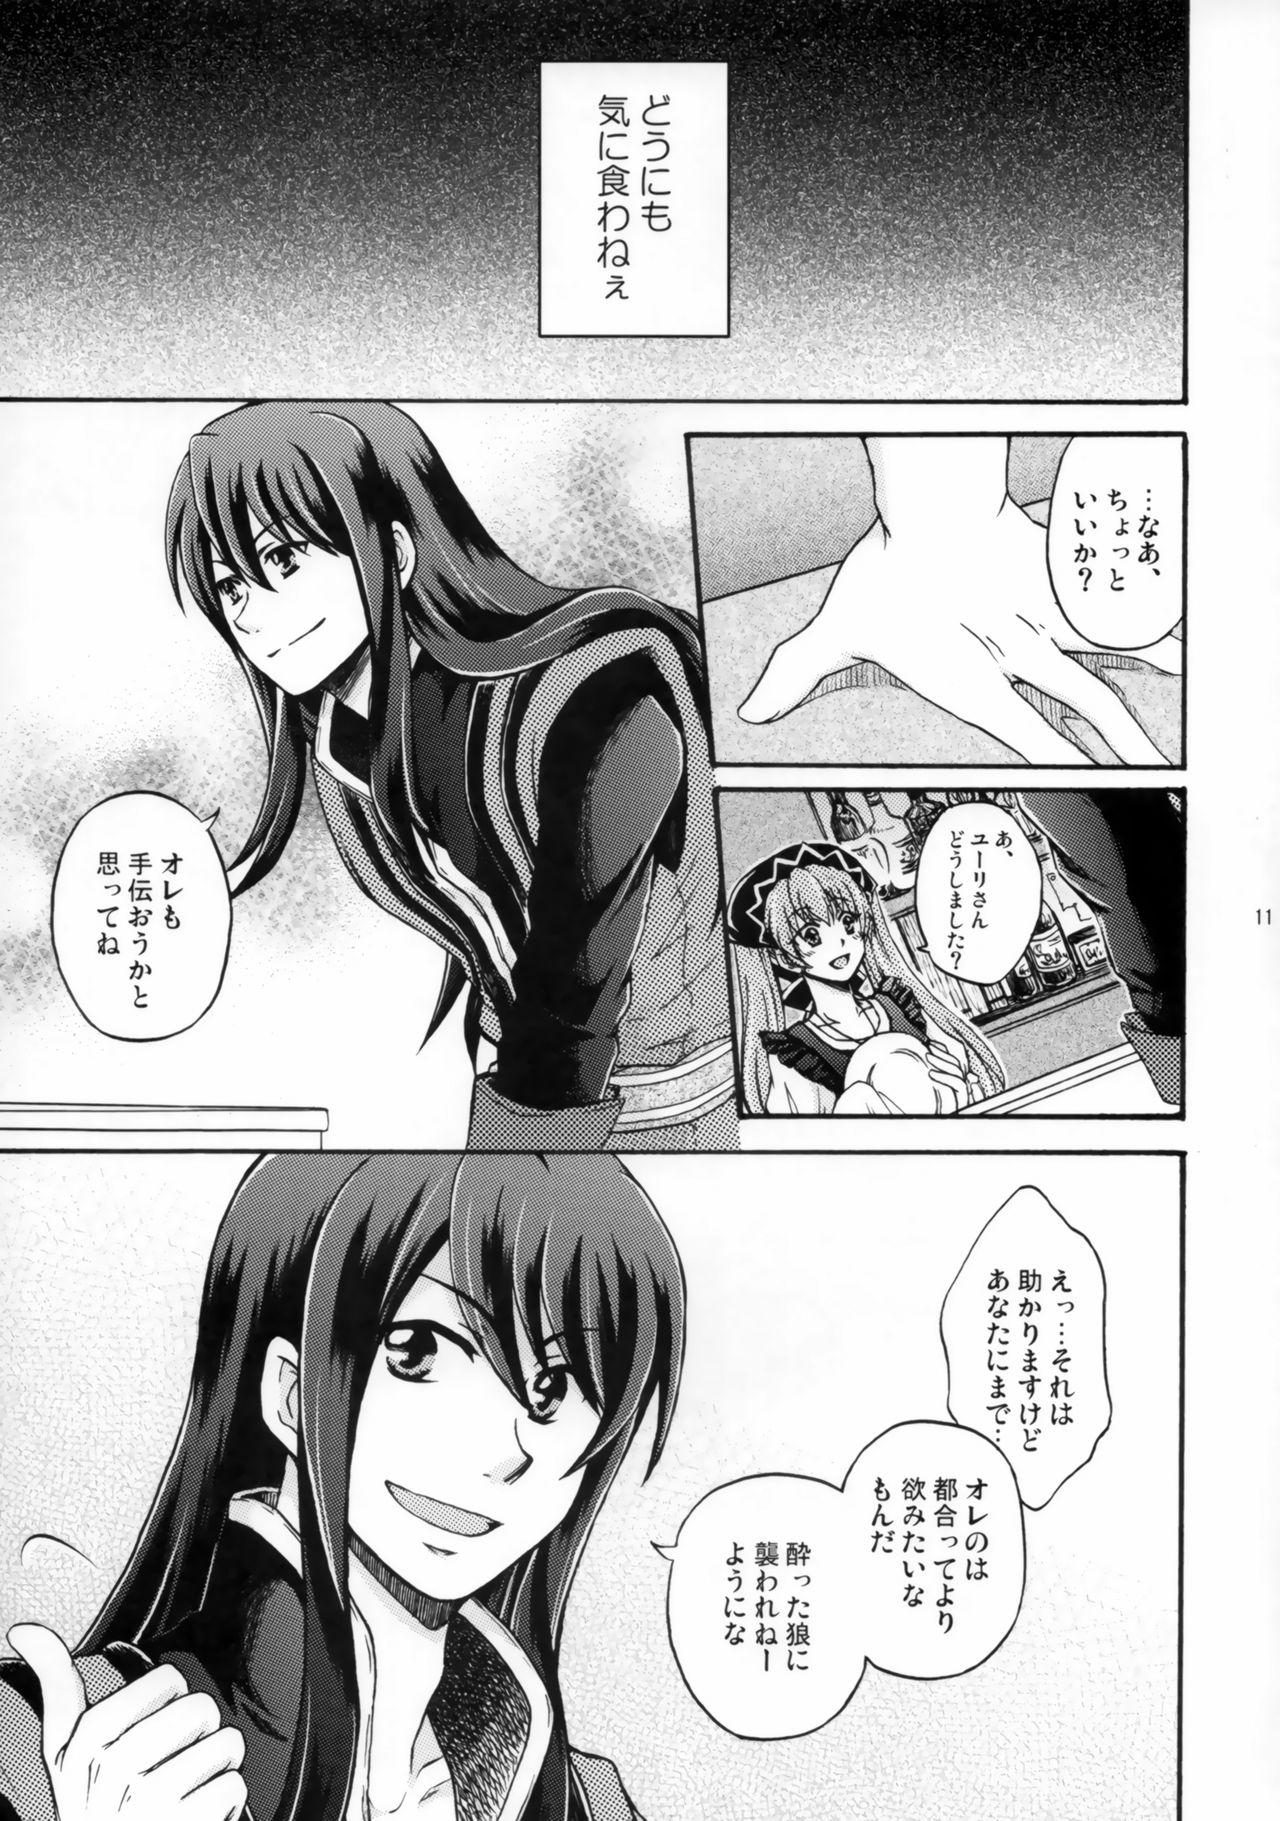 Hard SWEET BUNNY - Tales of vesperia Sologirl - Page 10